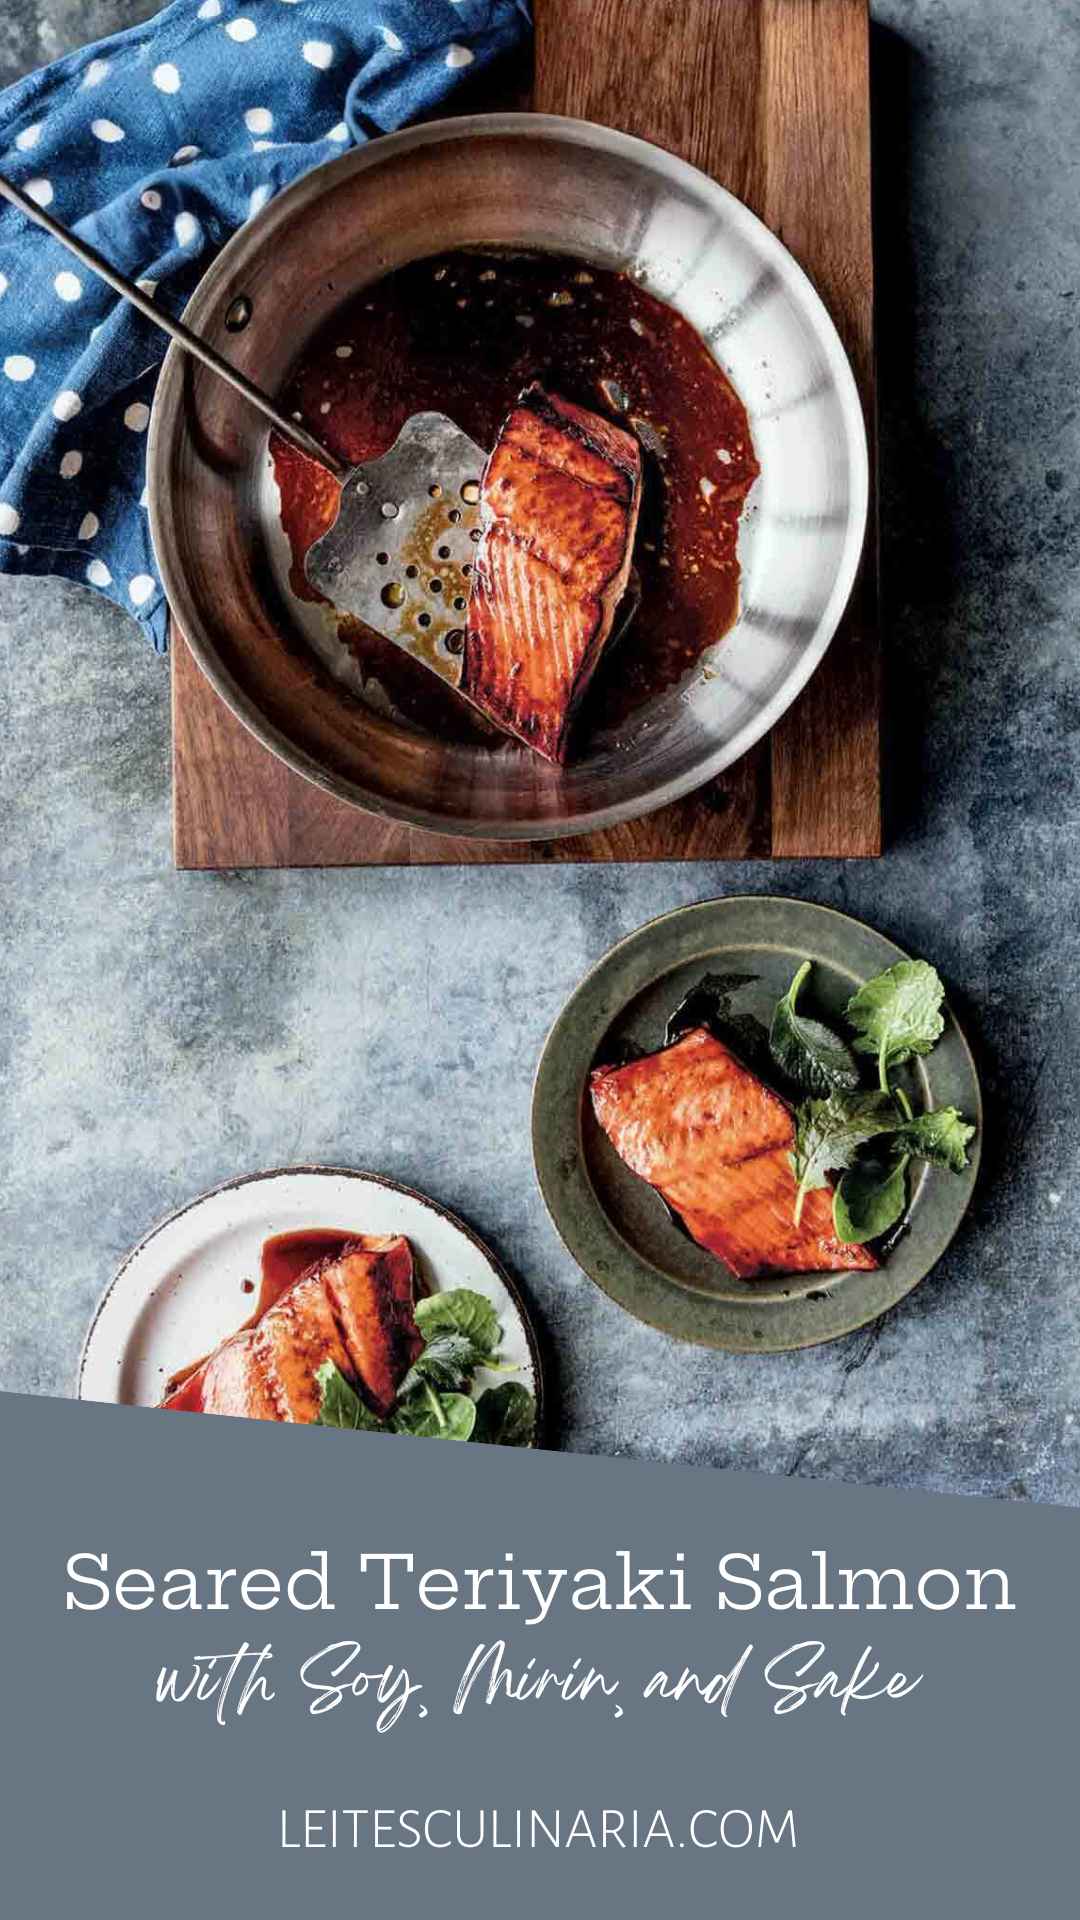 A piece of teriyaki salmon in a skillet, with two more pieces on plates nearby, along with mixed greens.